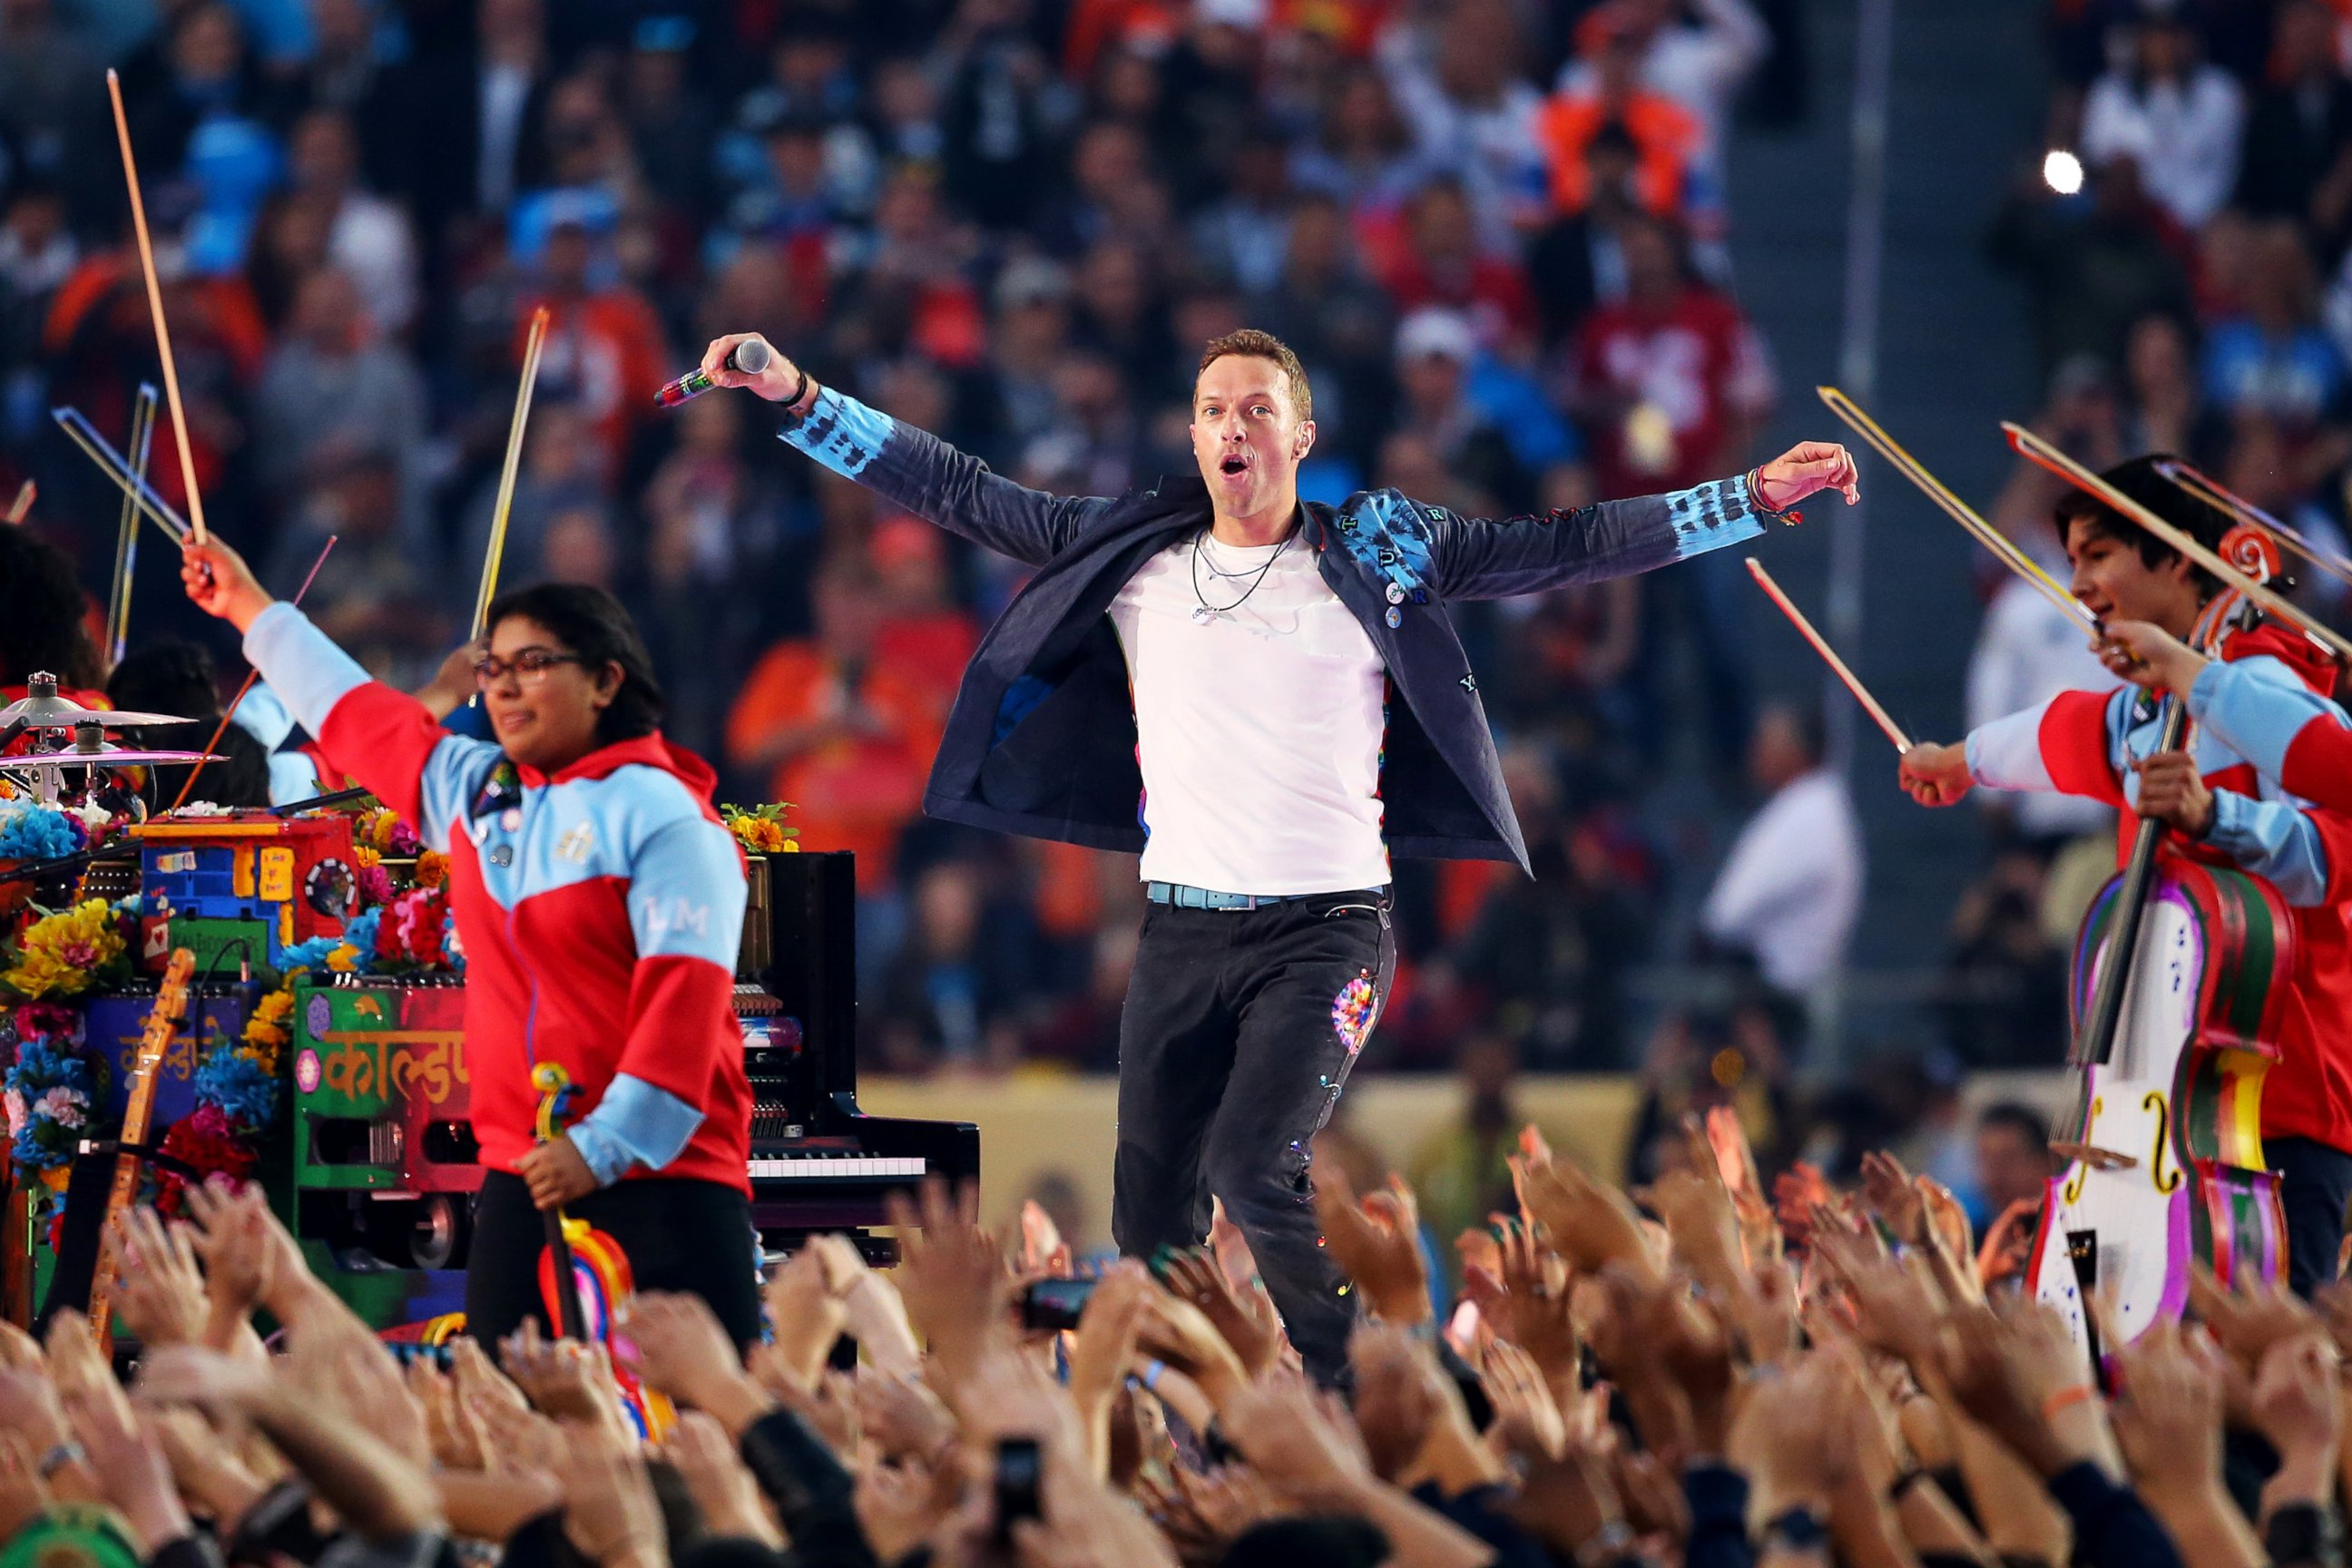 PHOTO: Chris Martin of Coldplay performs during the Pepsi Super Bowl 50 Halftime Show at Levi's Stadium on Feb. 7, 2016 in Santa Clara, Calif.